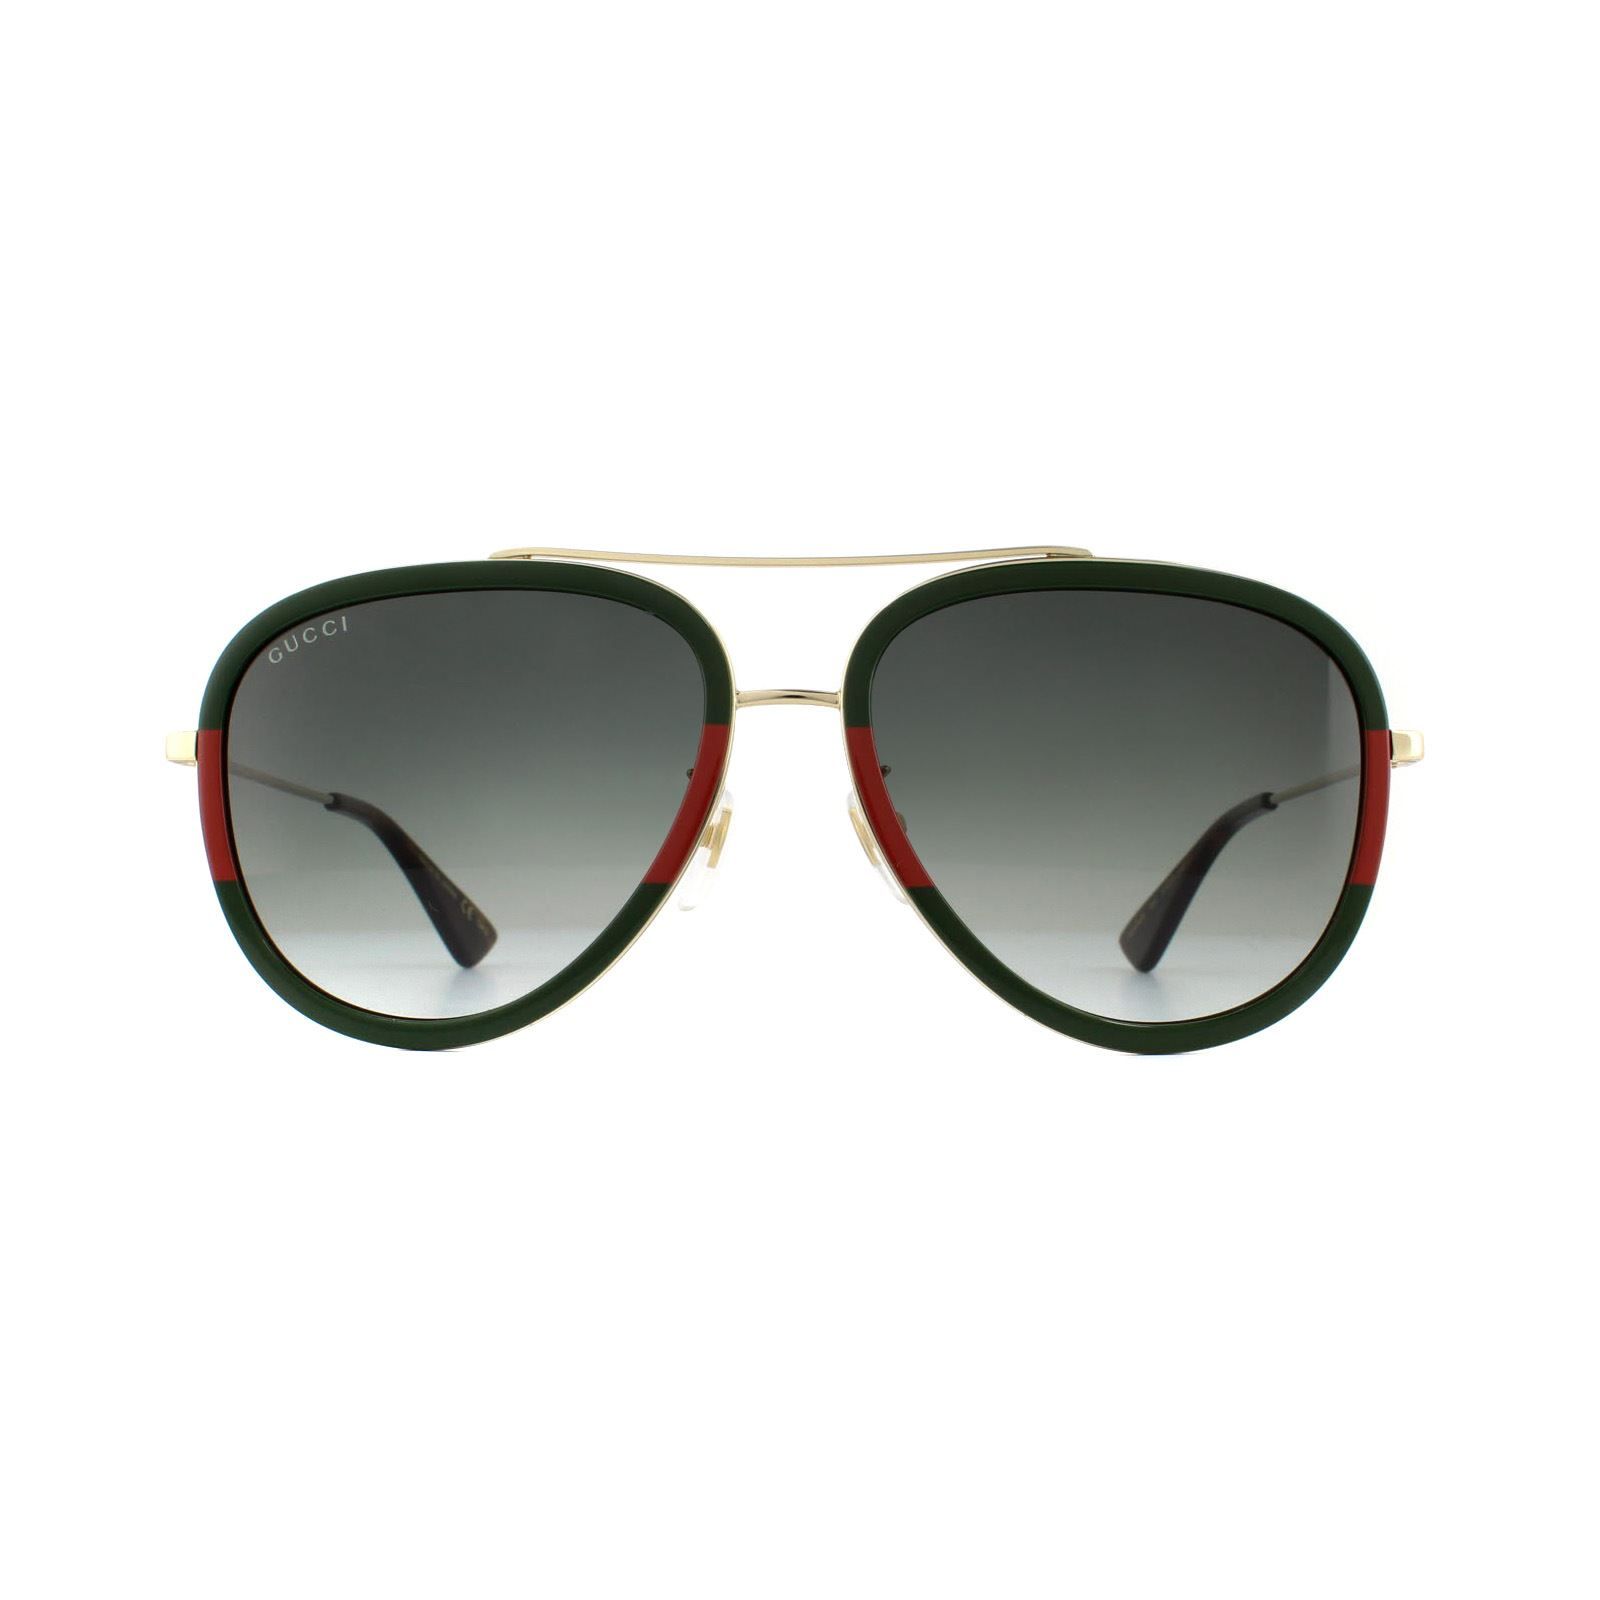 Gucci Sunglasses GG0062S 003 Gold Green Red Green Gradient are a super contemporary version of the classic aviator. The frame front and temple tips are crafted from acetate, and the temples, bridge and brow bar are made from metal, creating a cool contrast. Adjustable nose pads ensure the GG0062s have a personalised fit. Subtle branding can be found on the temples where the GG logo has been incorporated into the temple design.